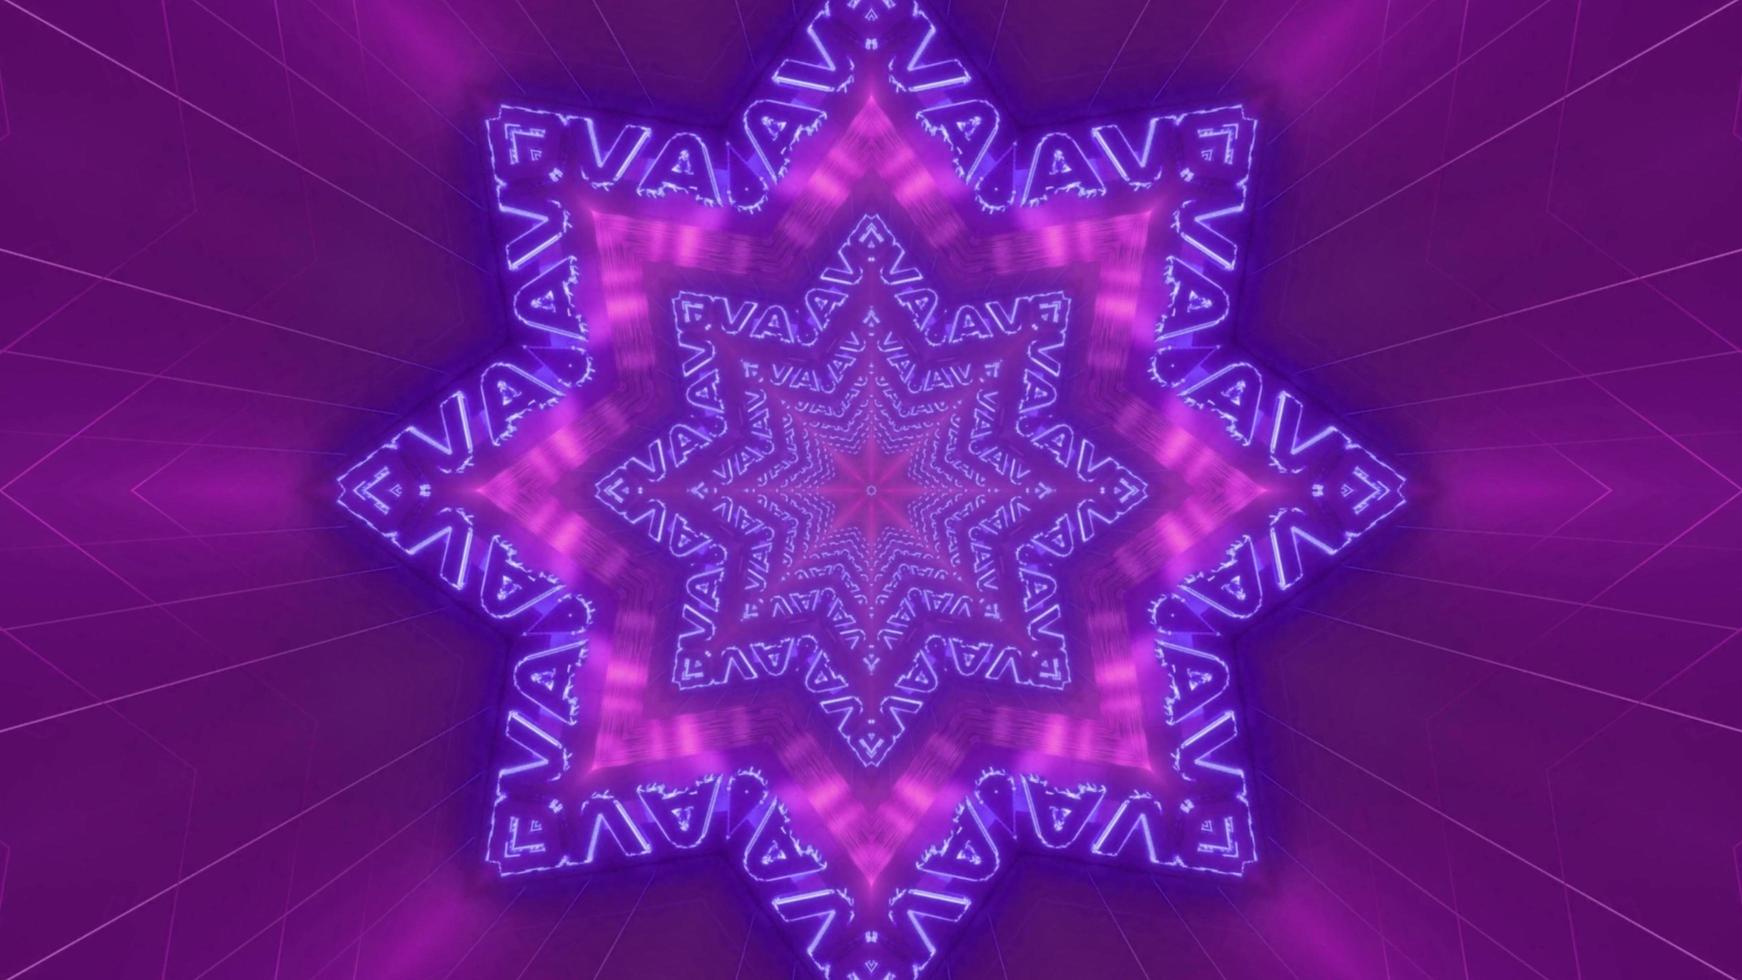 Blue and purple snowflake 3D kaleidoscope design illustration for background or texture photo